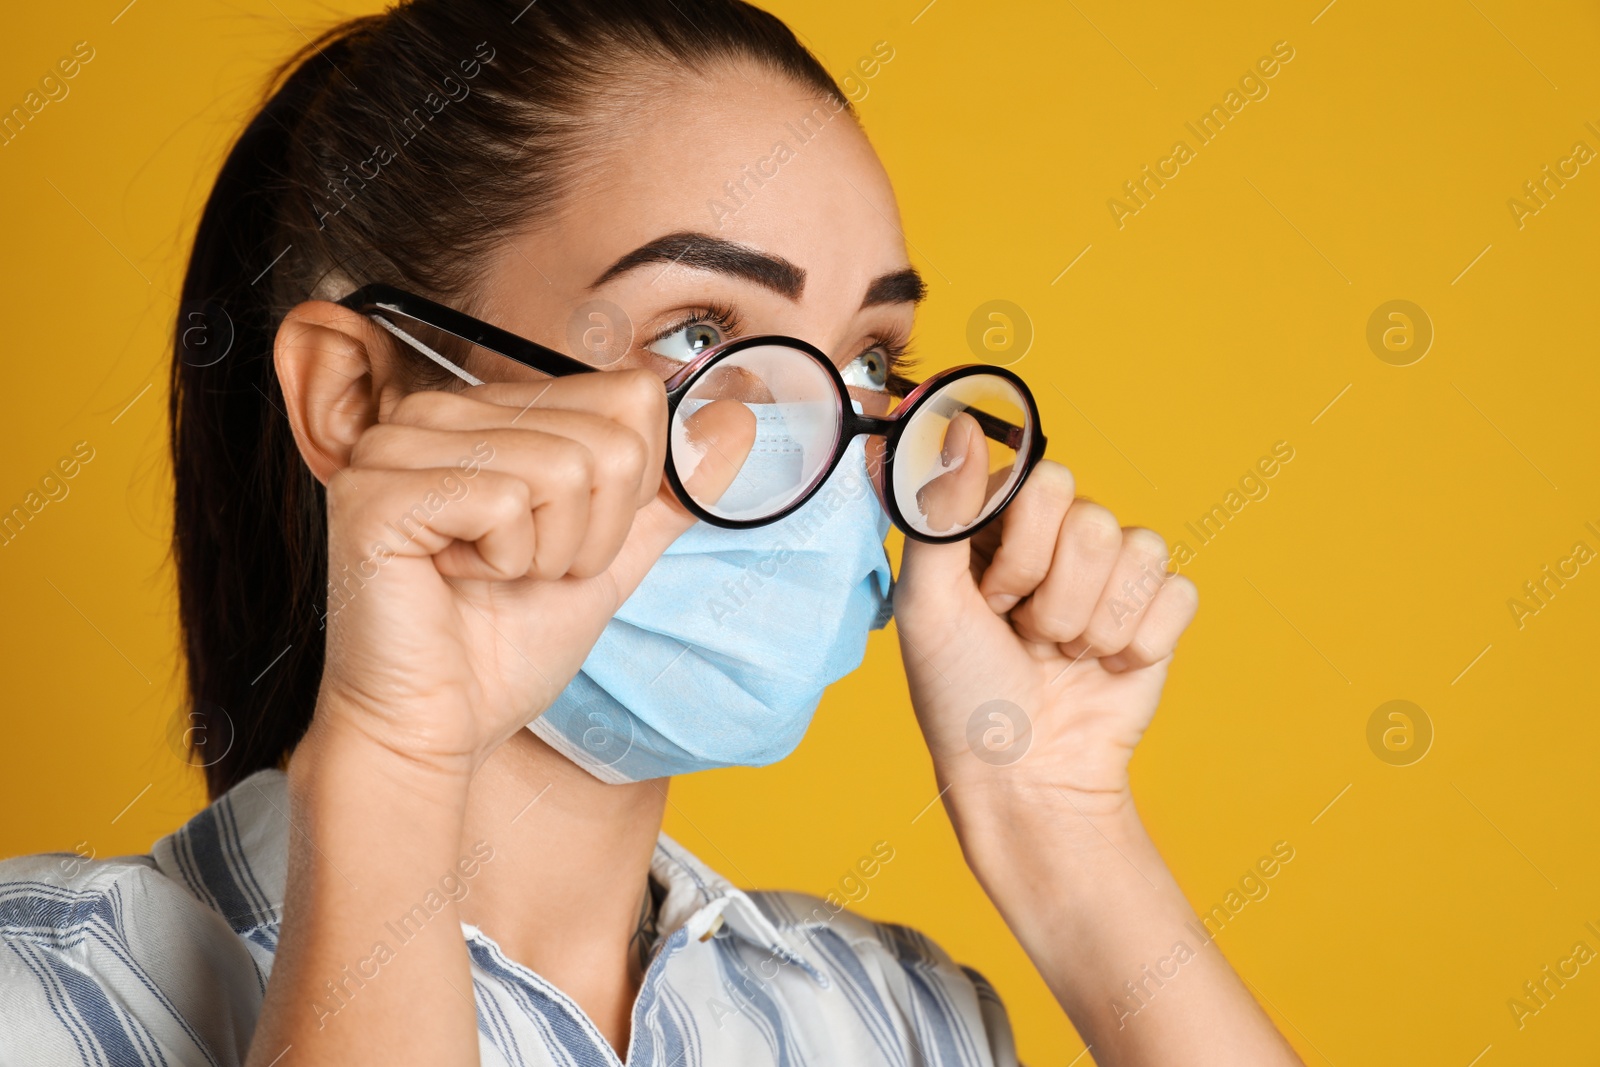 Photo of Woman wiping foggy glasses caused by wearing medical mask on yellow background, closeup